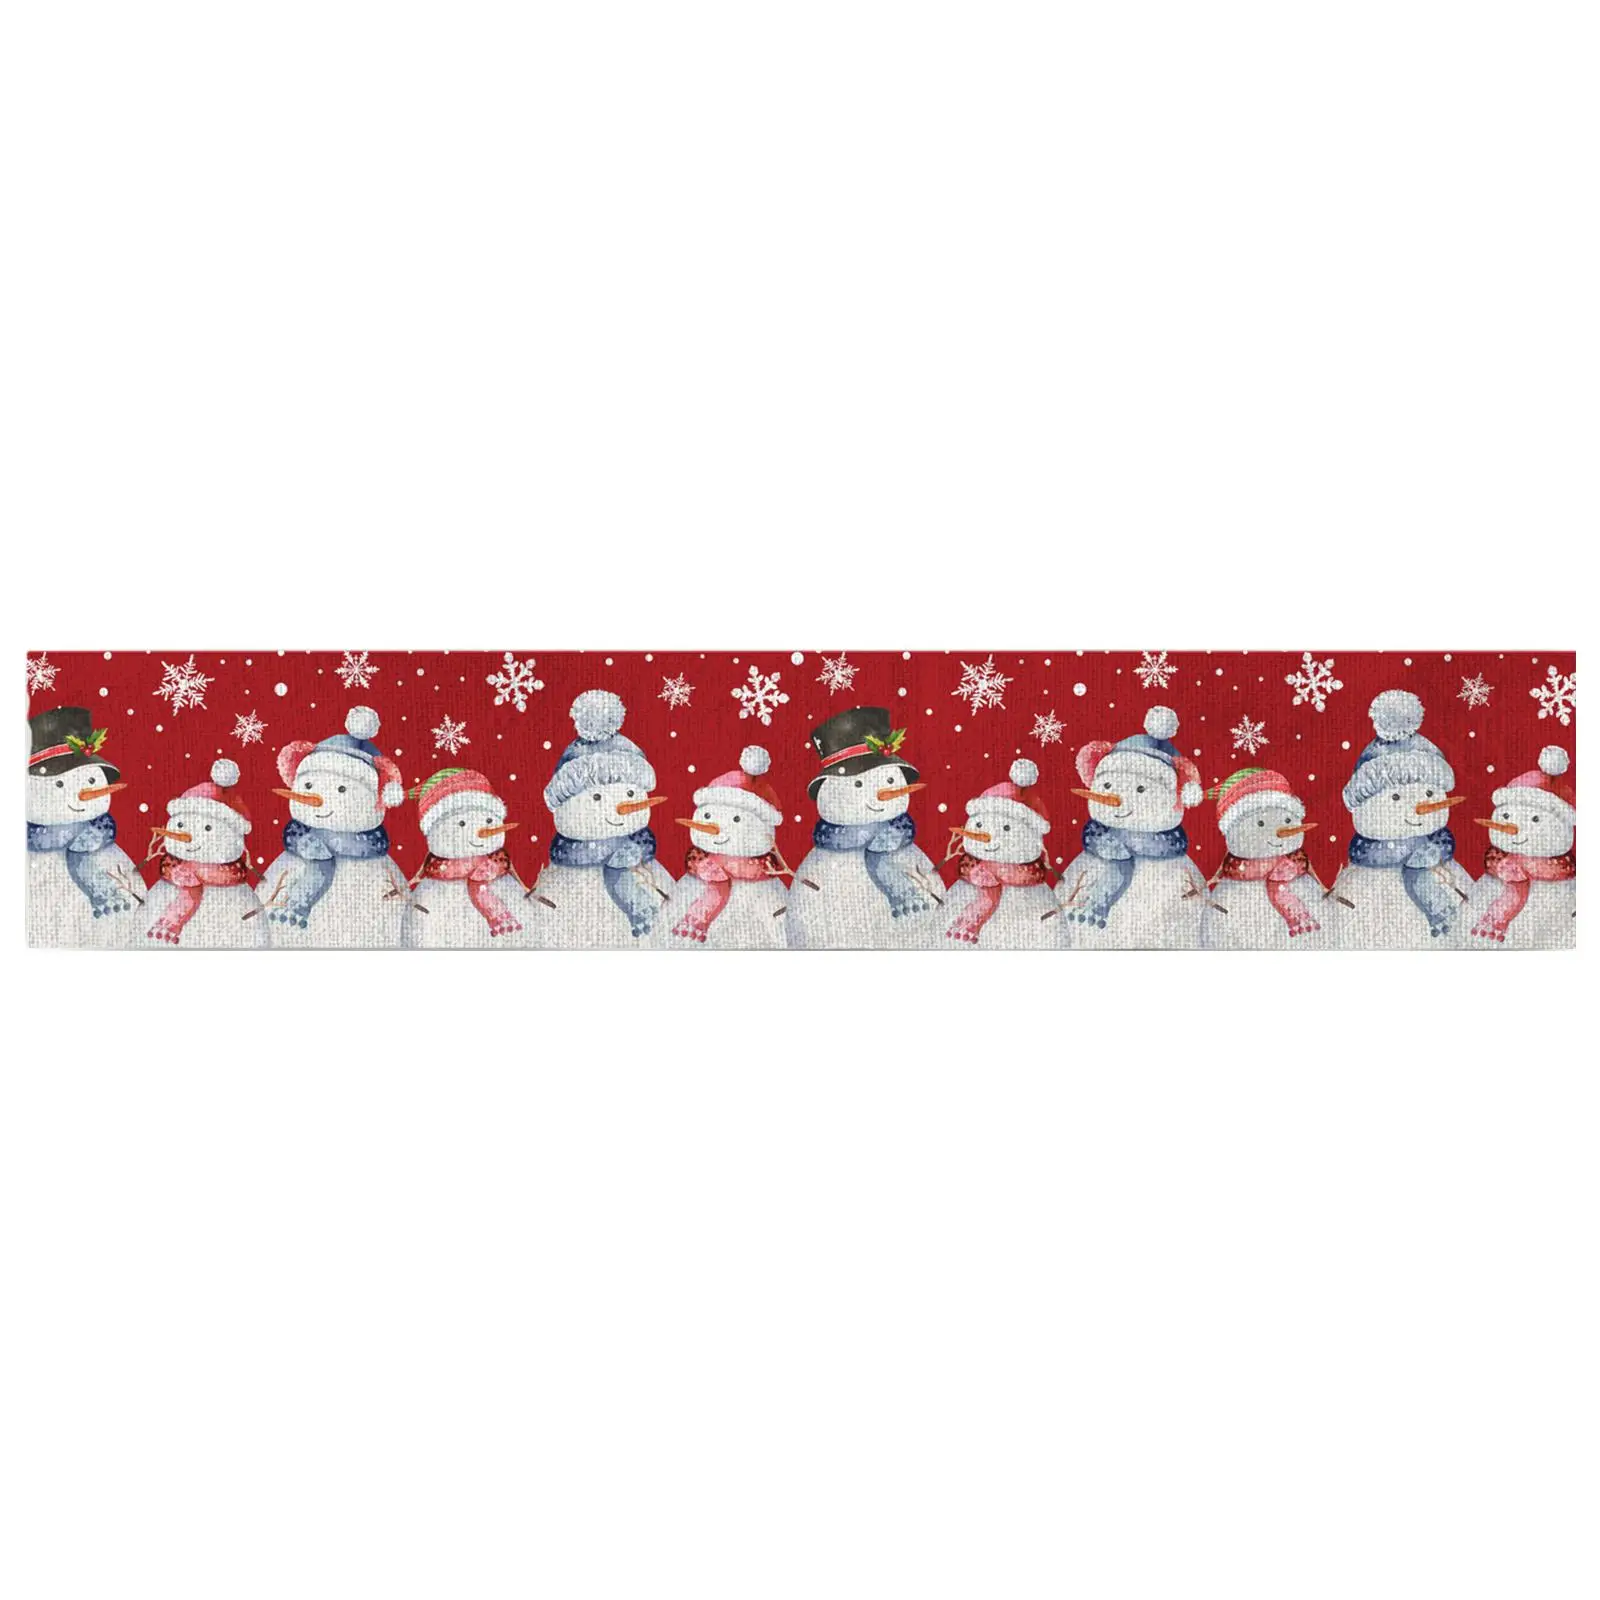 table runners Farmhouse table runners Winter Holiday 33x183cm for coffee Table Wedding